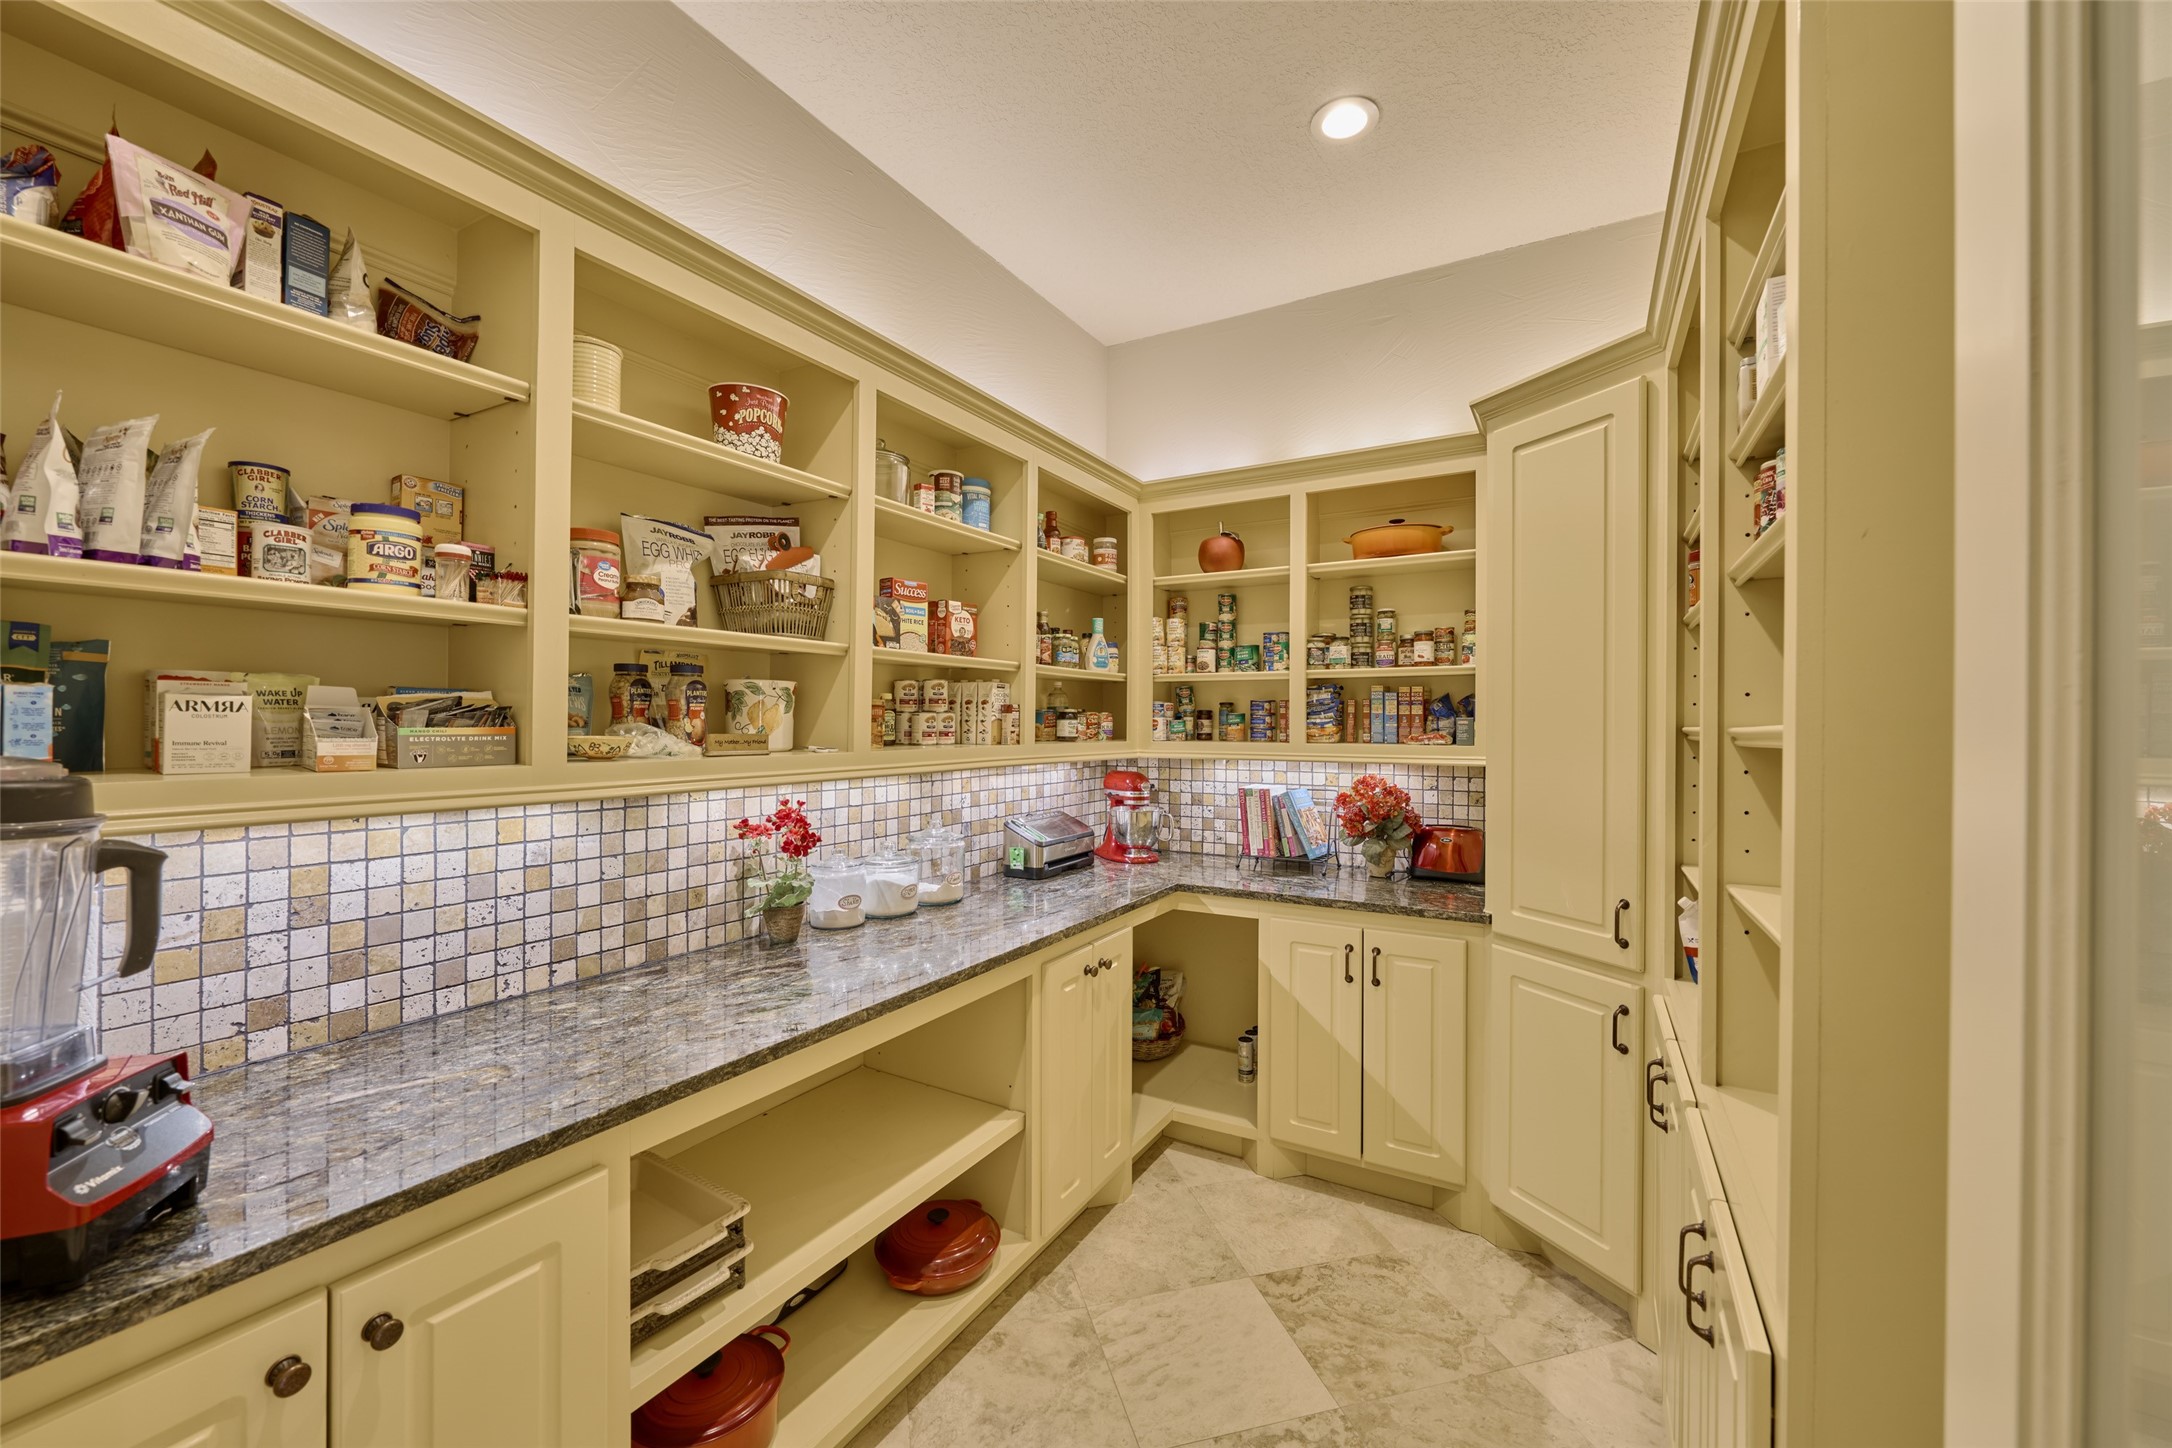 A walk-in pantry for the record books...  With open shelving, abundant cabinet space, granite counters, lots of storage space for large appliances, seasonal and entertaining cookware, platters, outlets to utilize your Vitamix or other accessories inside the pantry and larger kitchen items.  This panty is 7 X 11 - larger than most closets, abundant space to store all of your pantry items and more!  Above and under counter lighting.